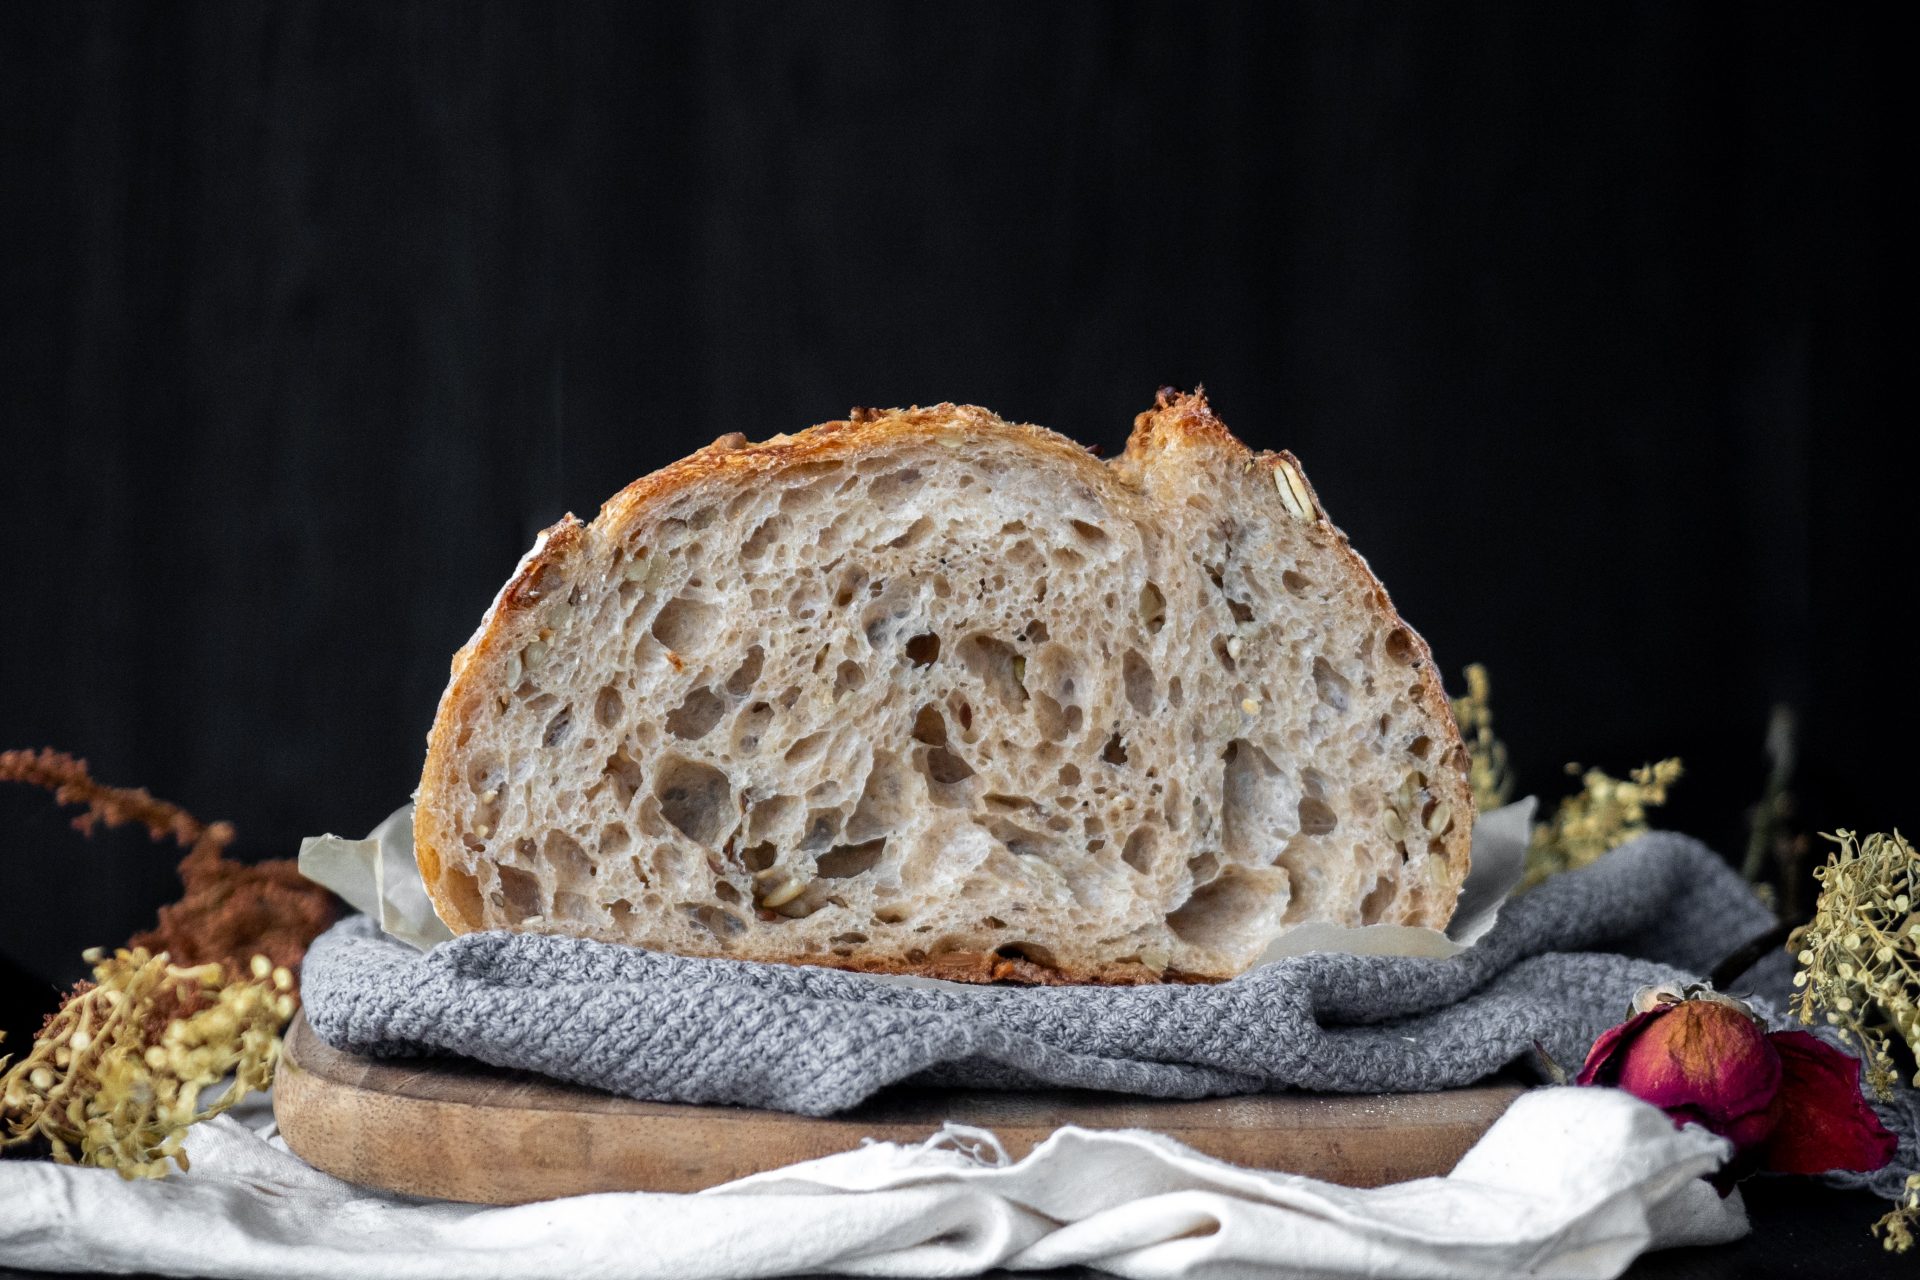 <p>Again, studies are really just getting started, but a 2022 experiment in mice showed potential health benefits of sourdough bread, such as cholesterol reduction, inflammation alleviation, and healthy gut microbiota maintenance when compared to non-fermented but similar white bread.</p> <p>Photo: Vicky Ng/Unsplash</p>